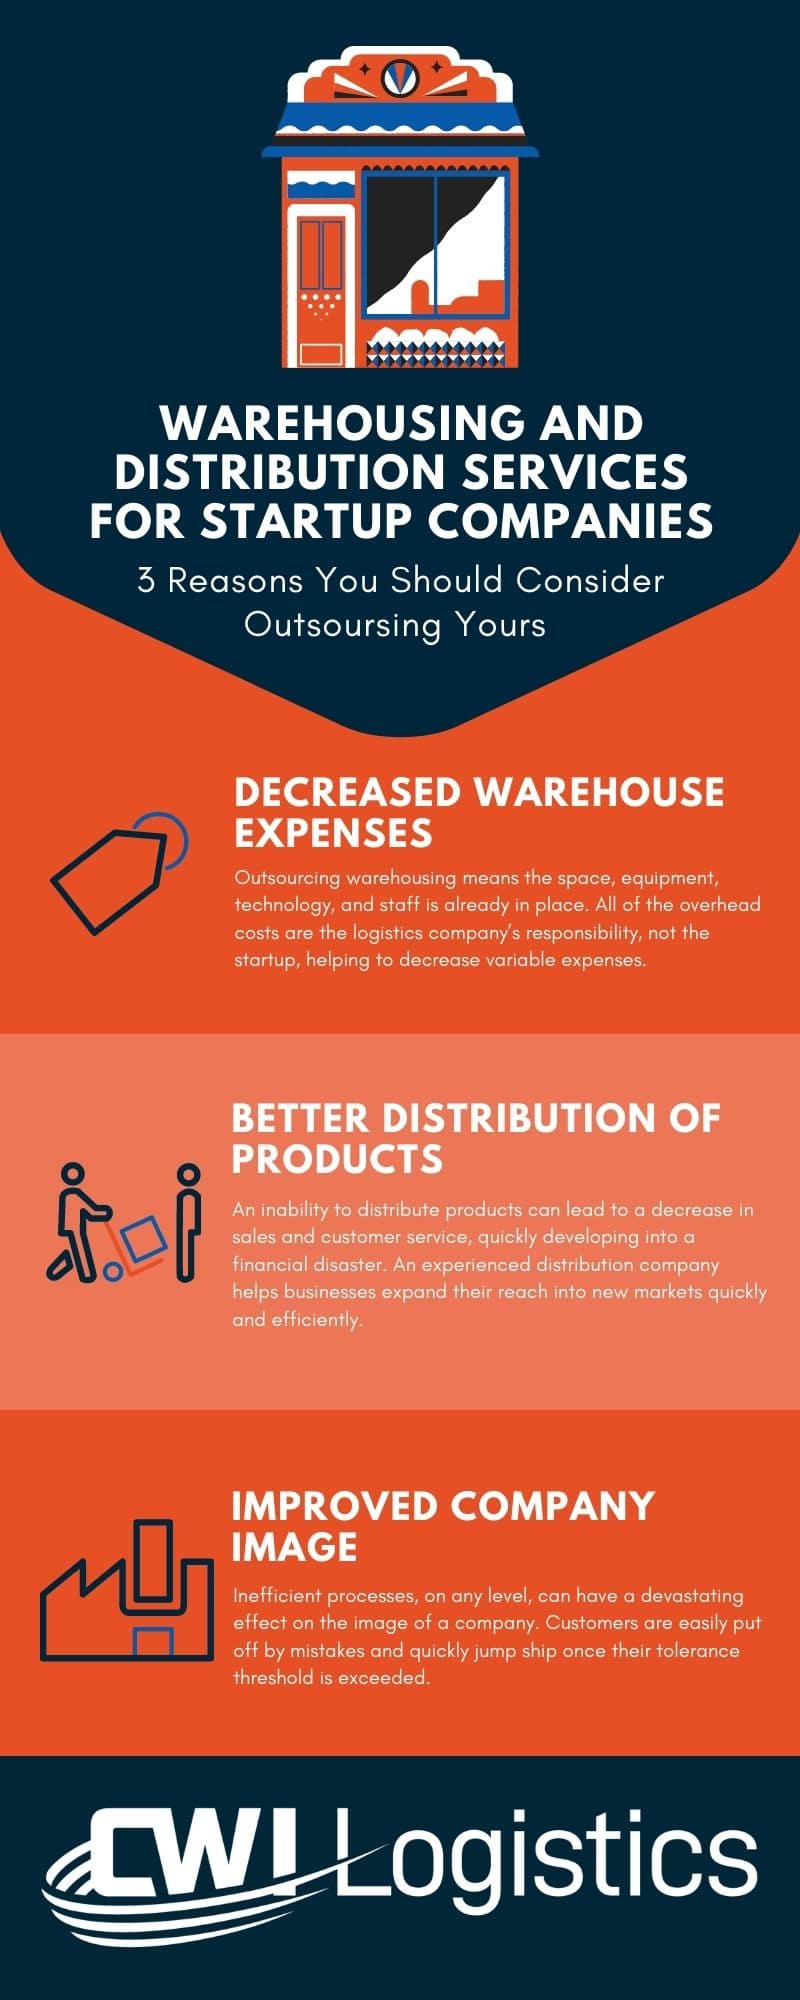 Warehousing and distribution for startups, reasons to consider